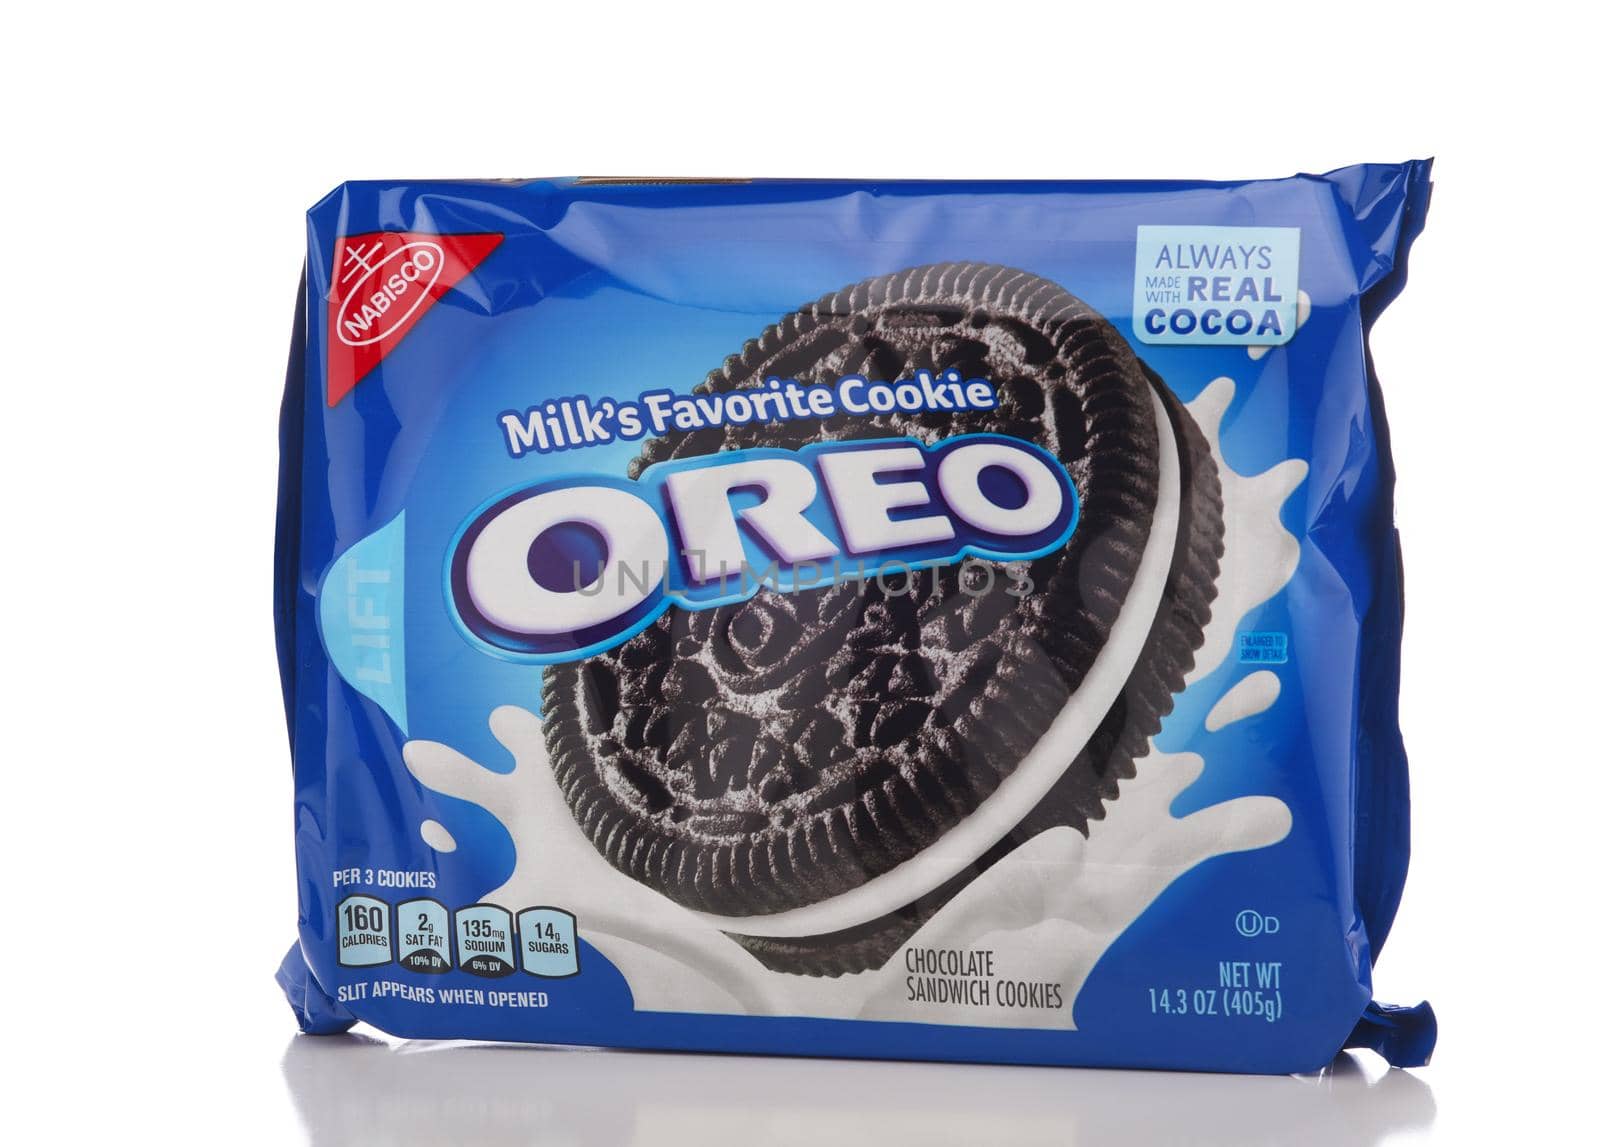 A package of Oreo Cookies from Nabisco. Milks Favorite Cookie. by sCukrov